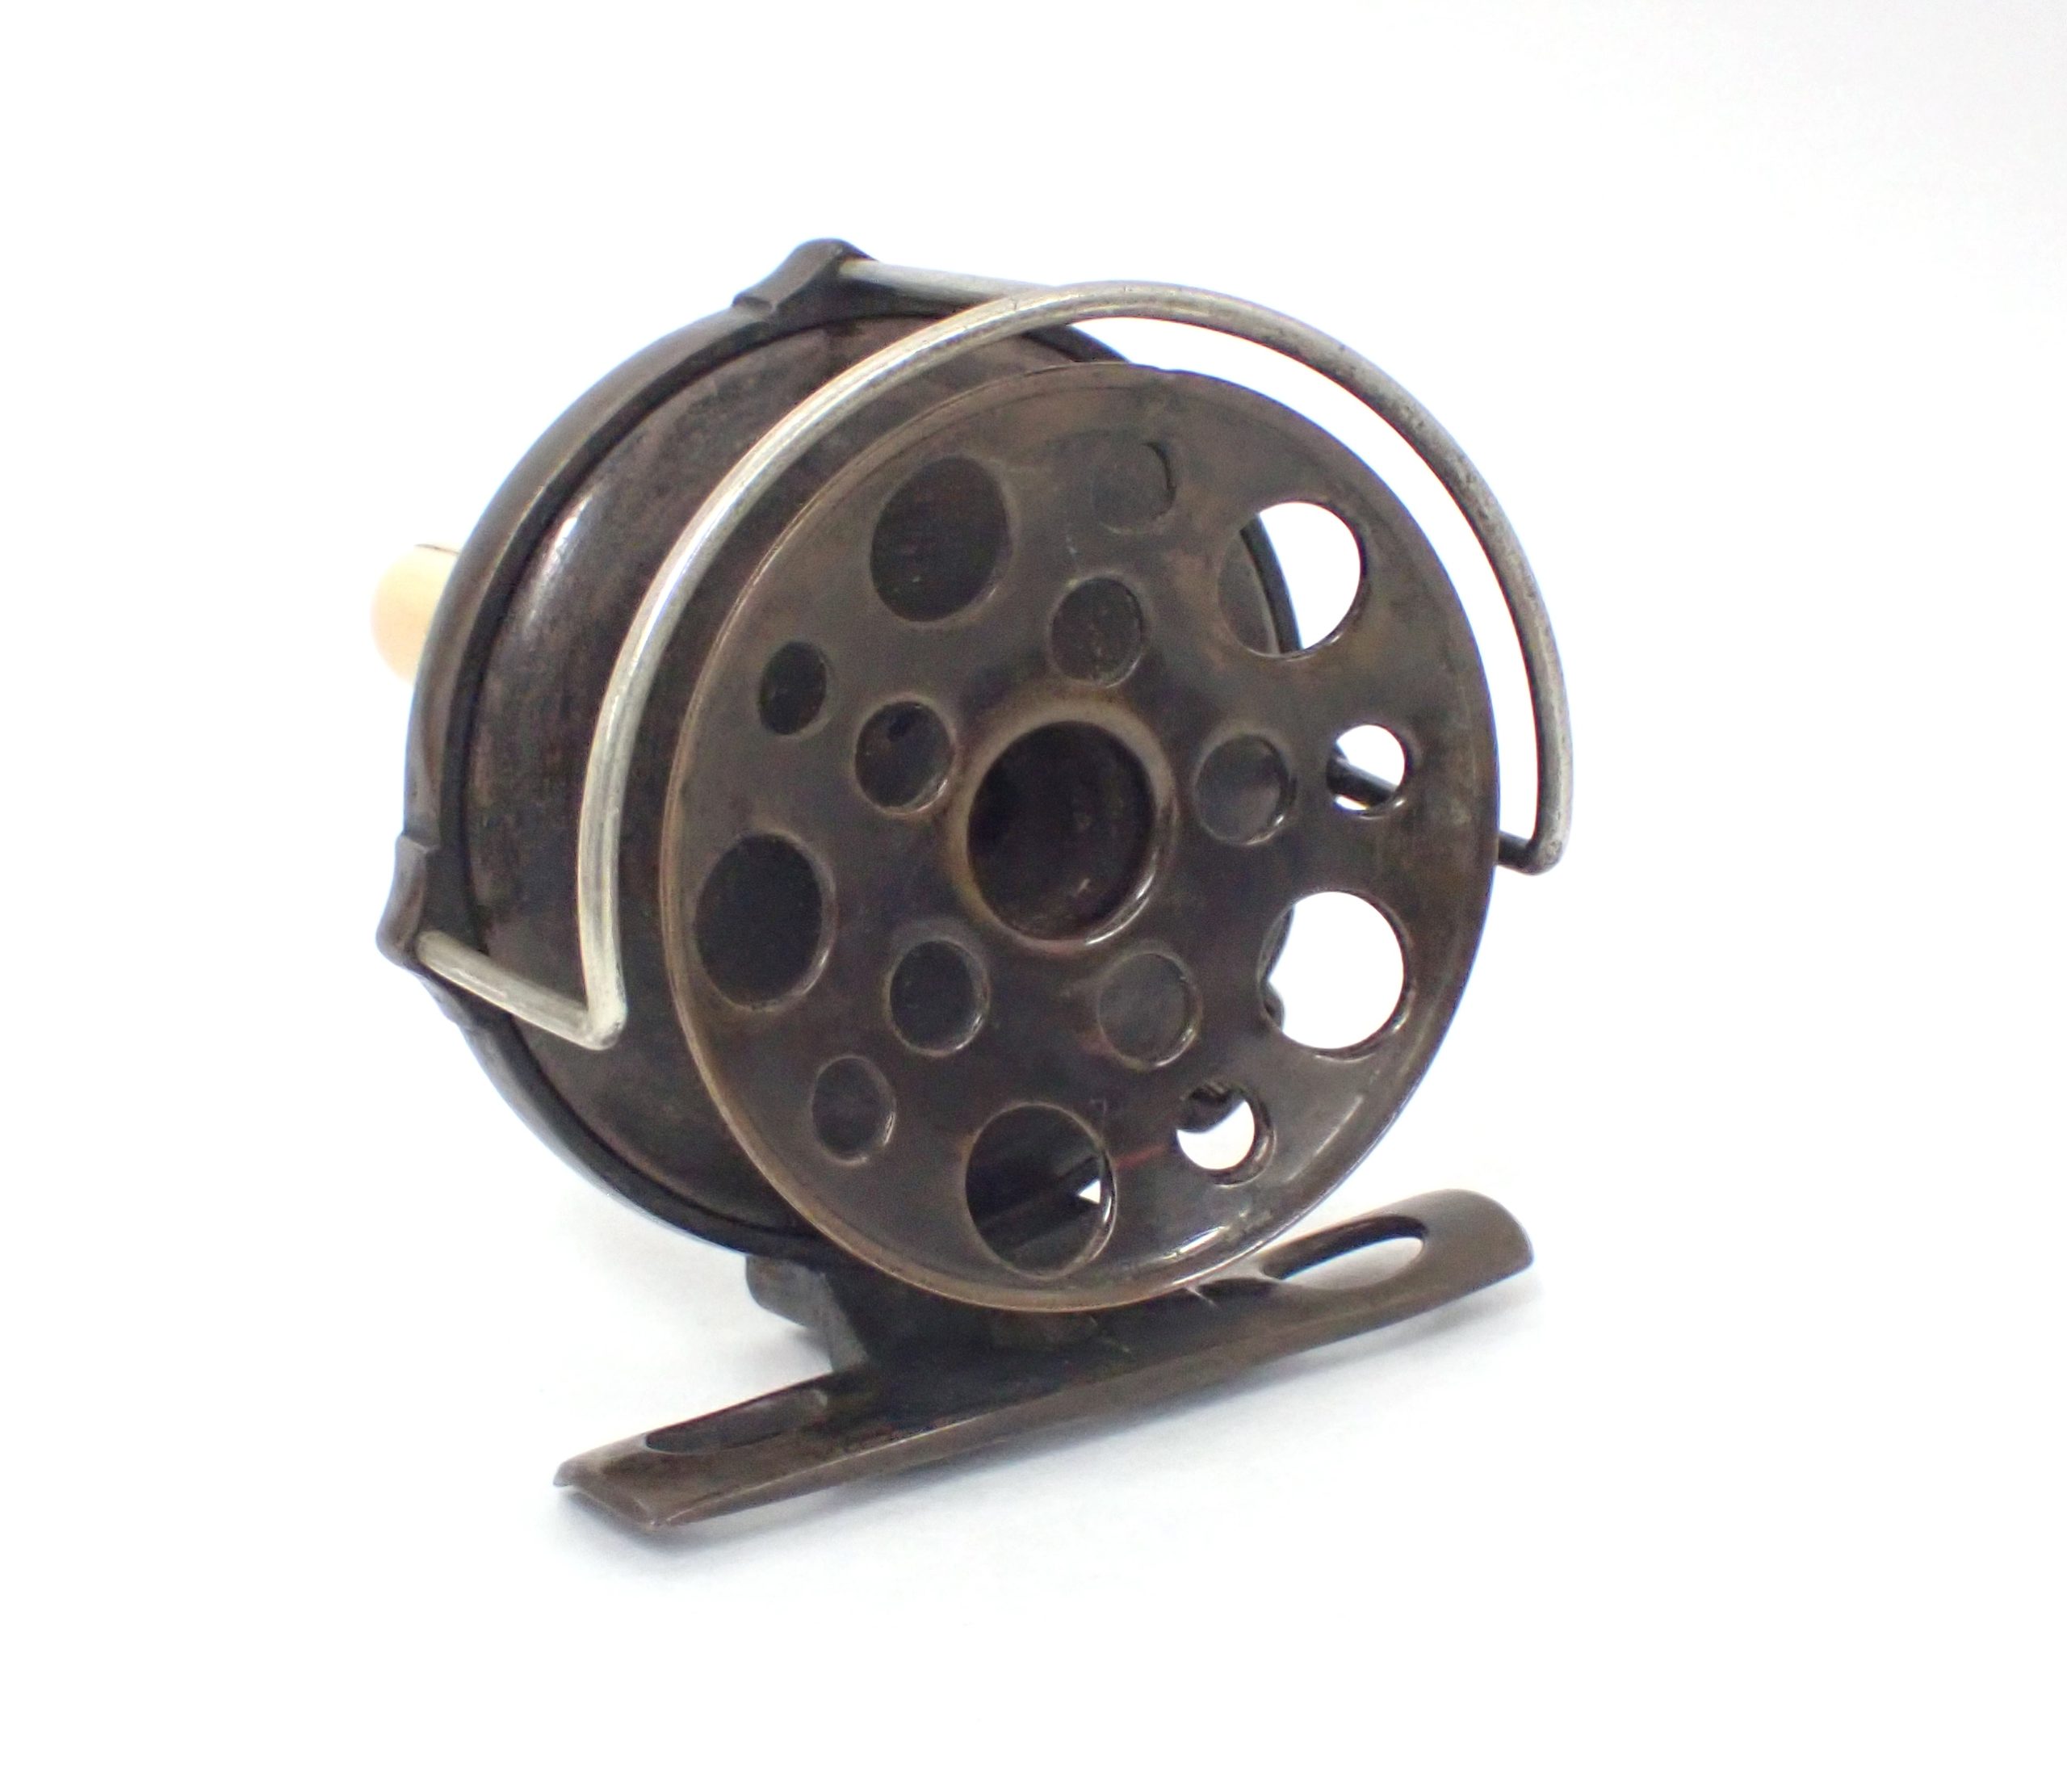 Vintage Hardy Perfect Reel - 1891 Catalogue